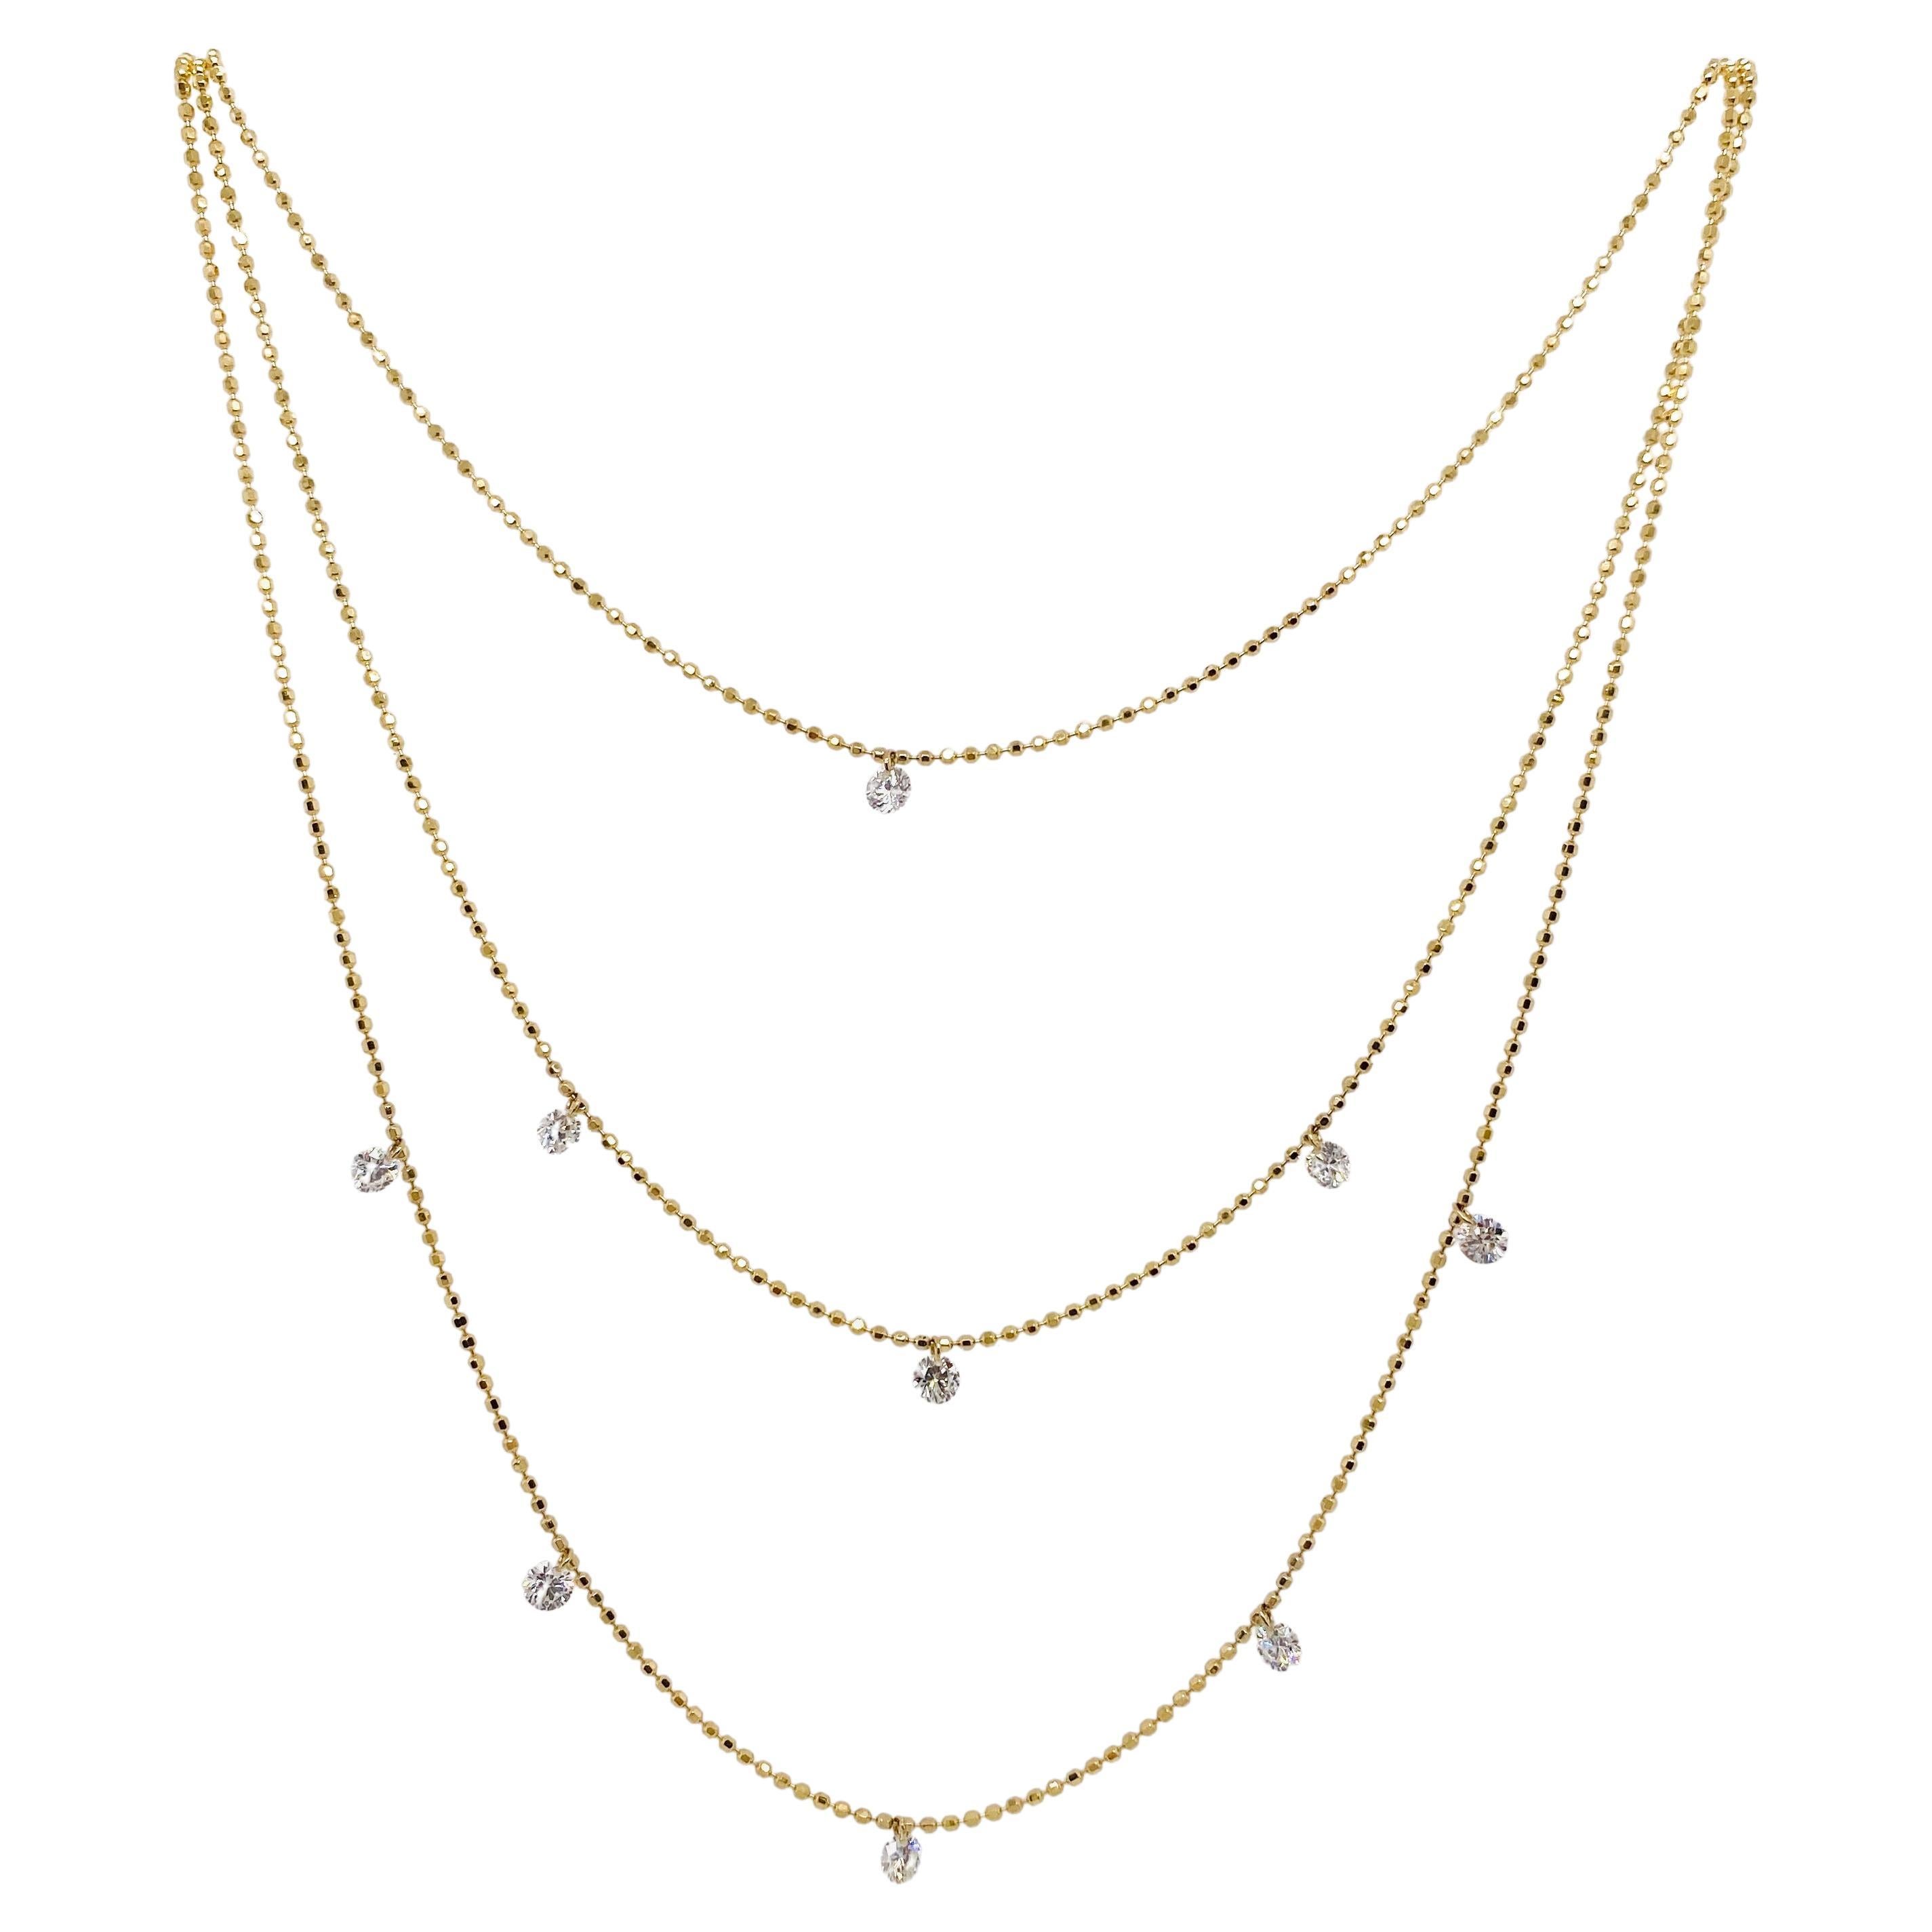 Dashing Diamond Three Layer Necklace .72 Carats in 14K Yellow Gold Beaded Chain